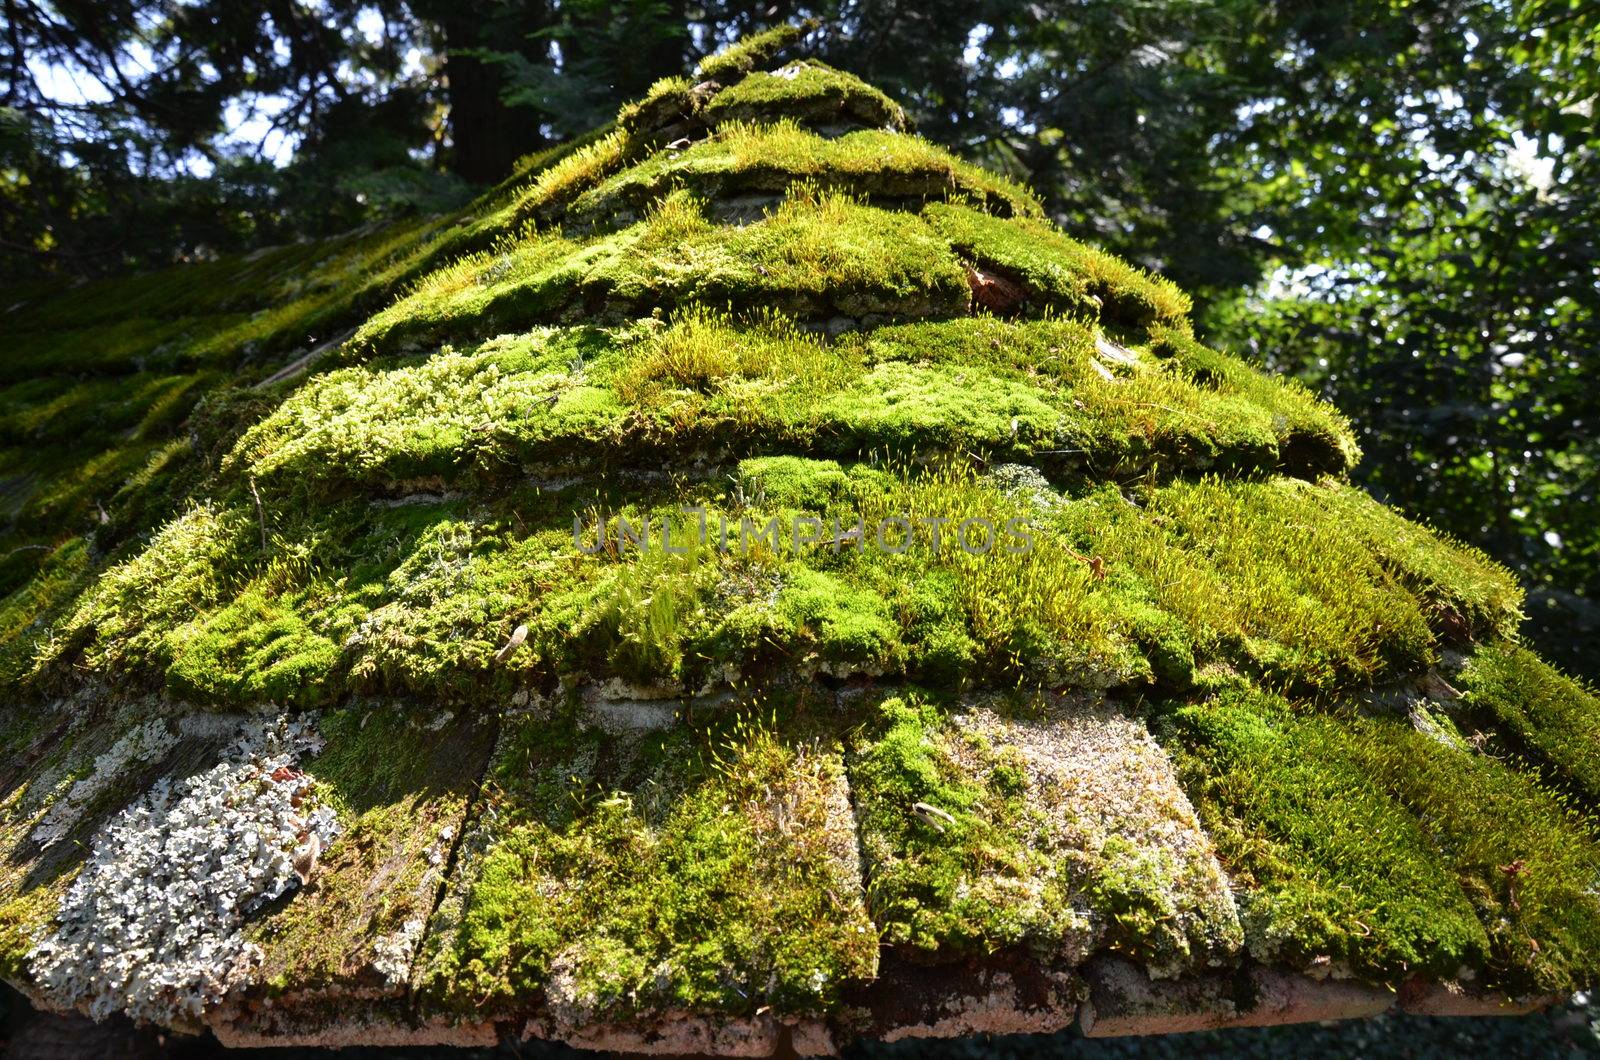 worn or weathered wood roof tiles or shingles with green moss